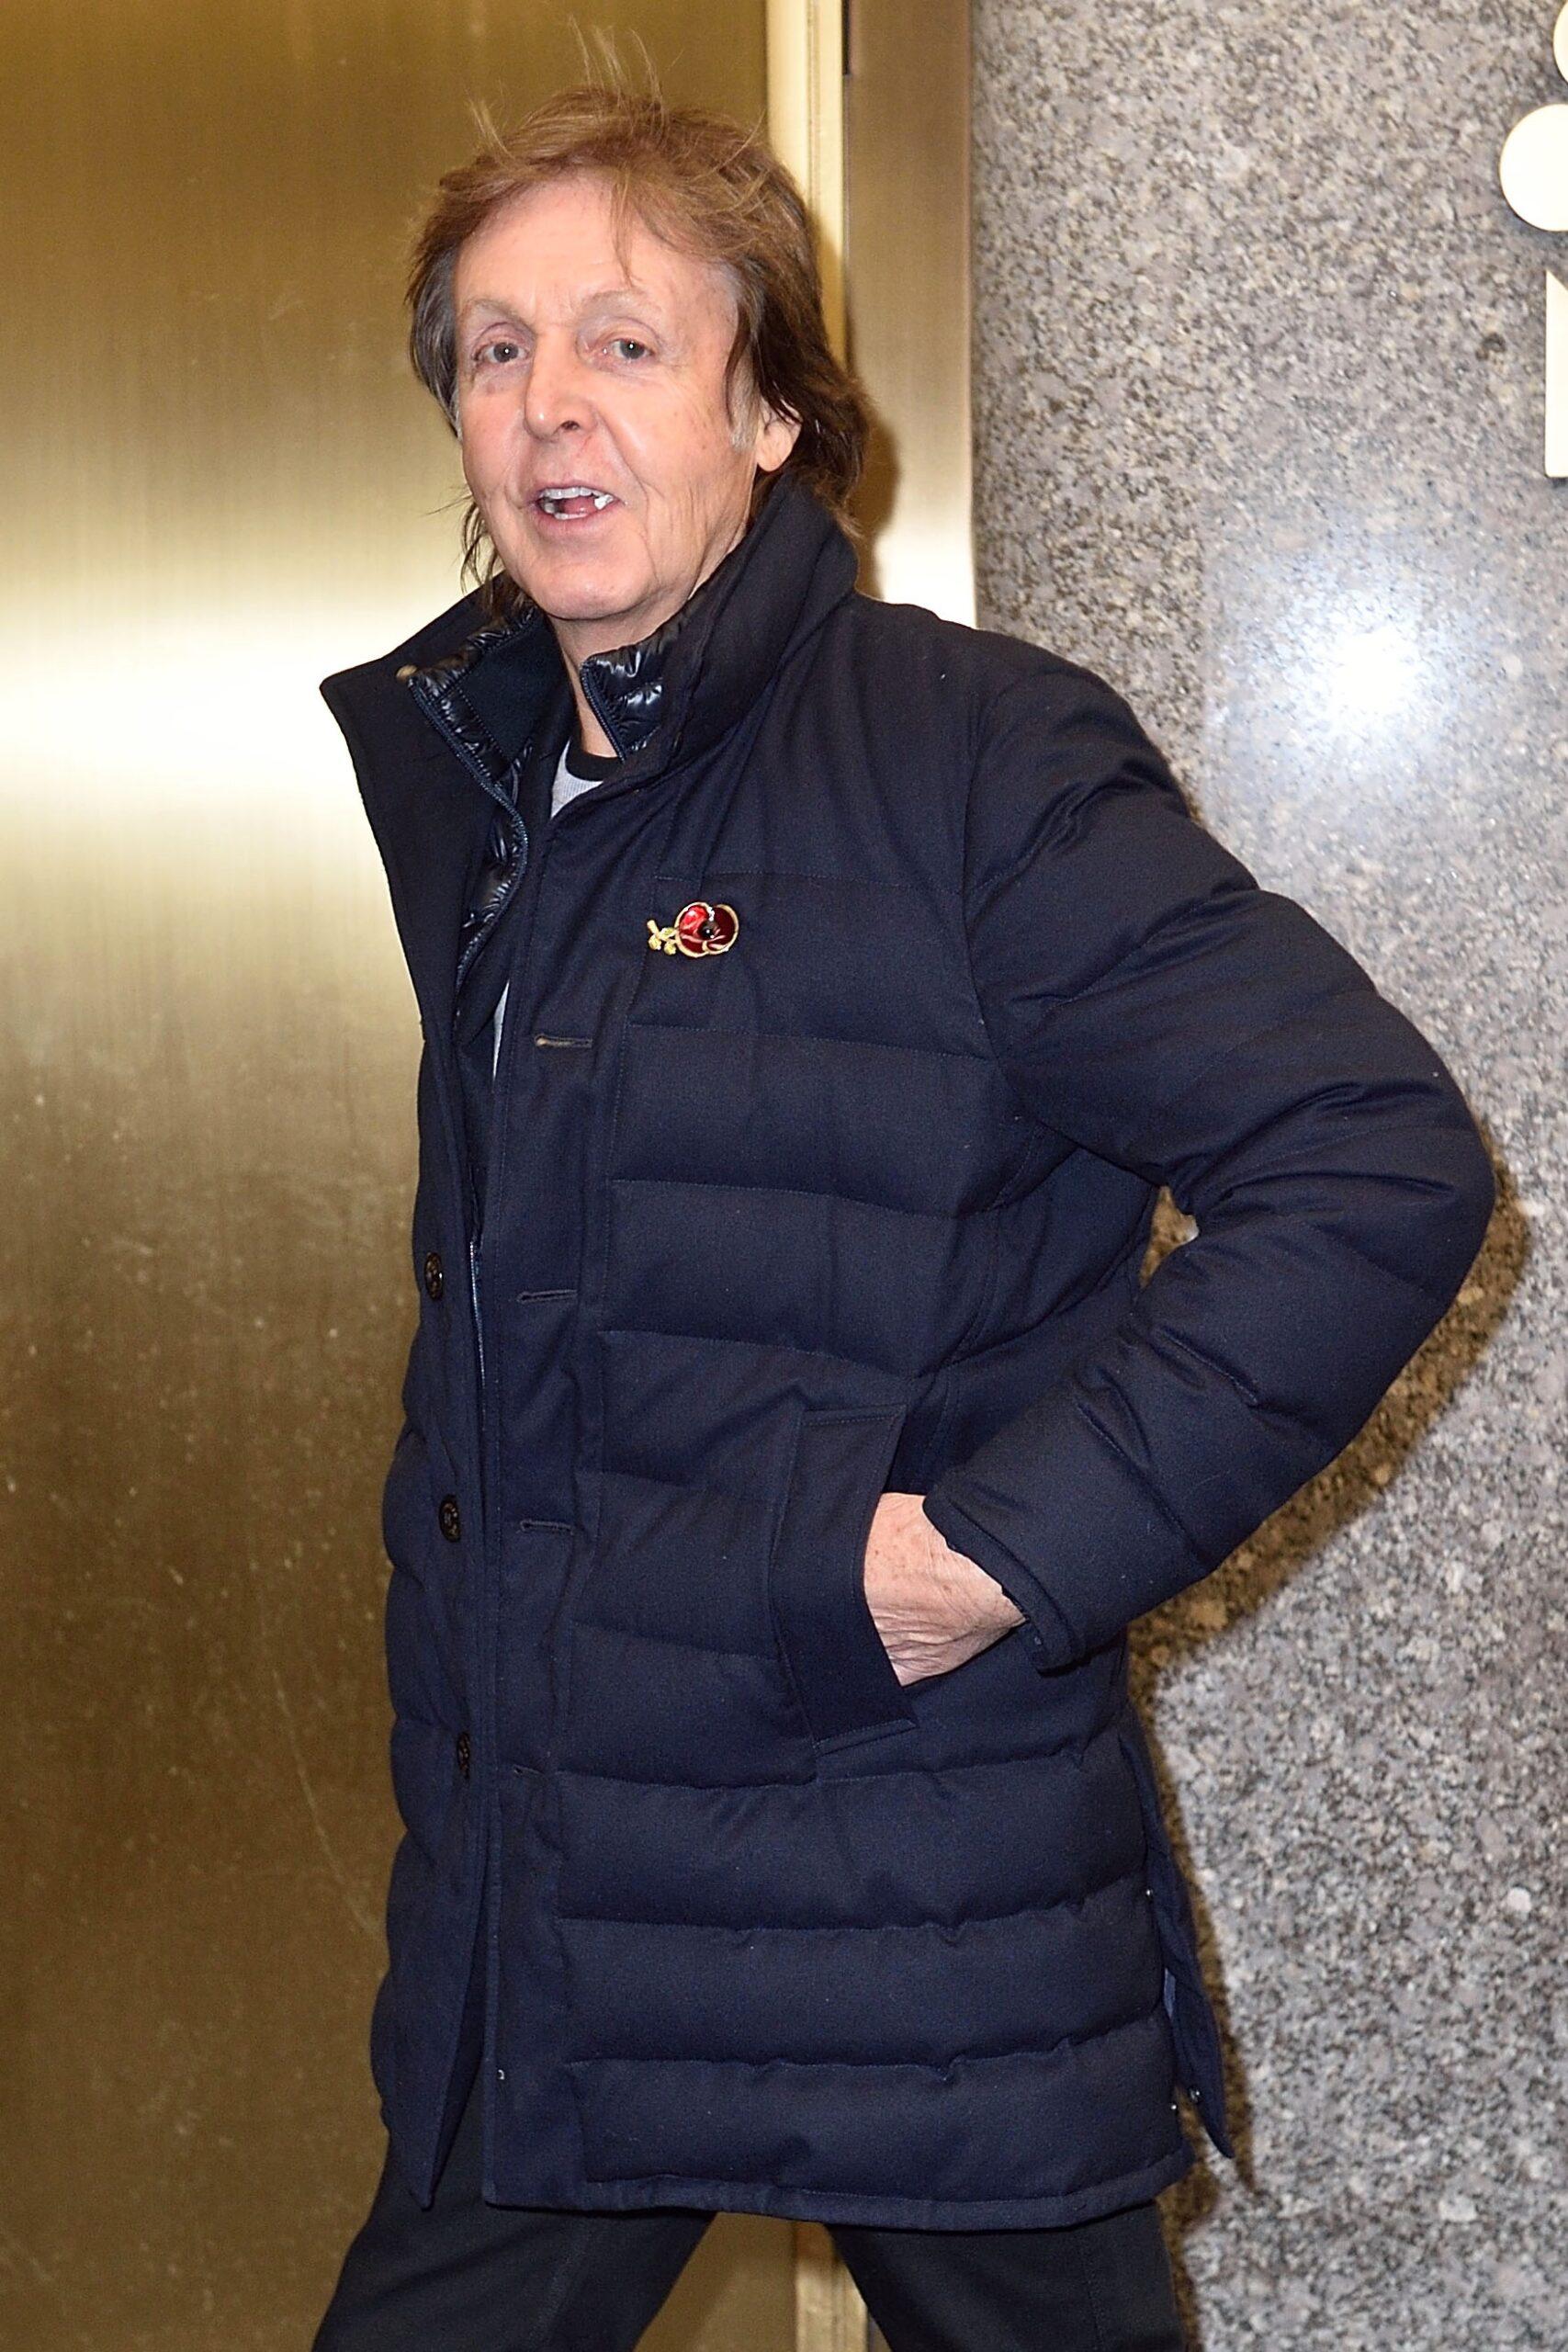 Paul McCartney seen out and about in NYC. 17 Nov 2016 Pictured: Paul McCartney. 